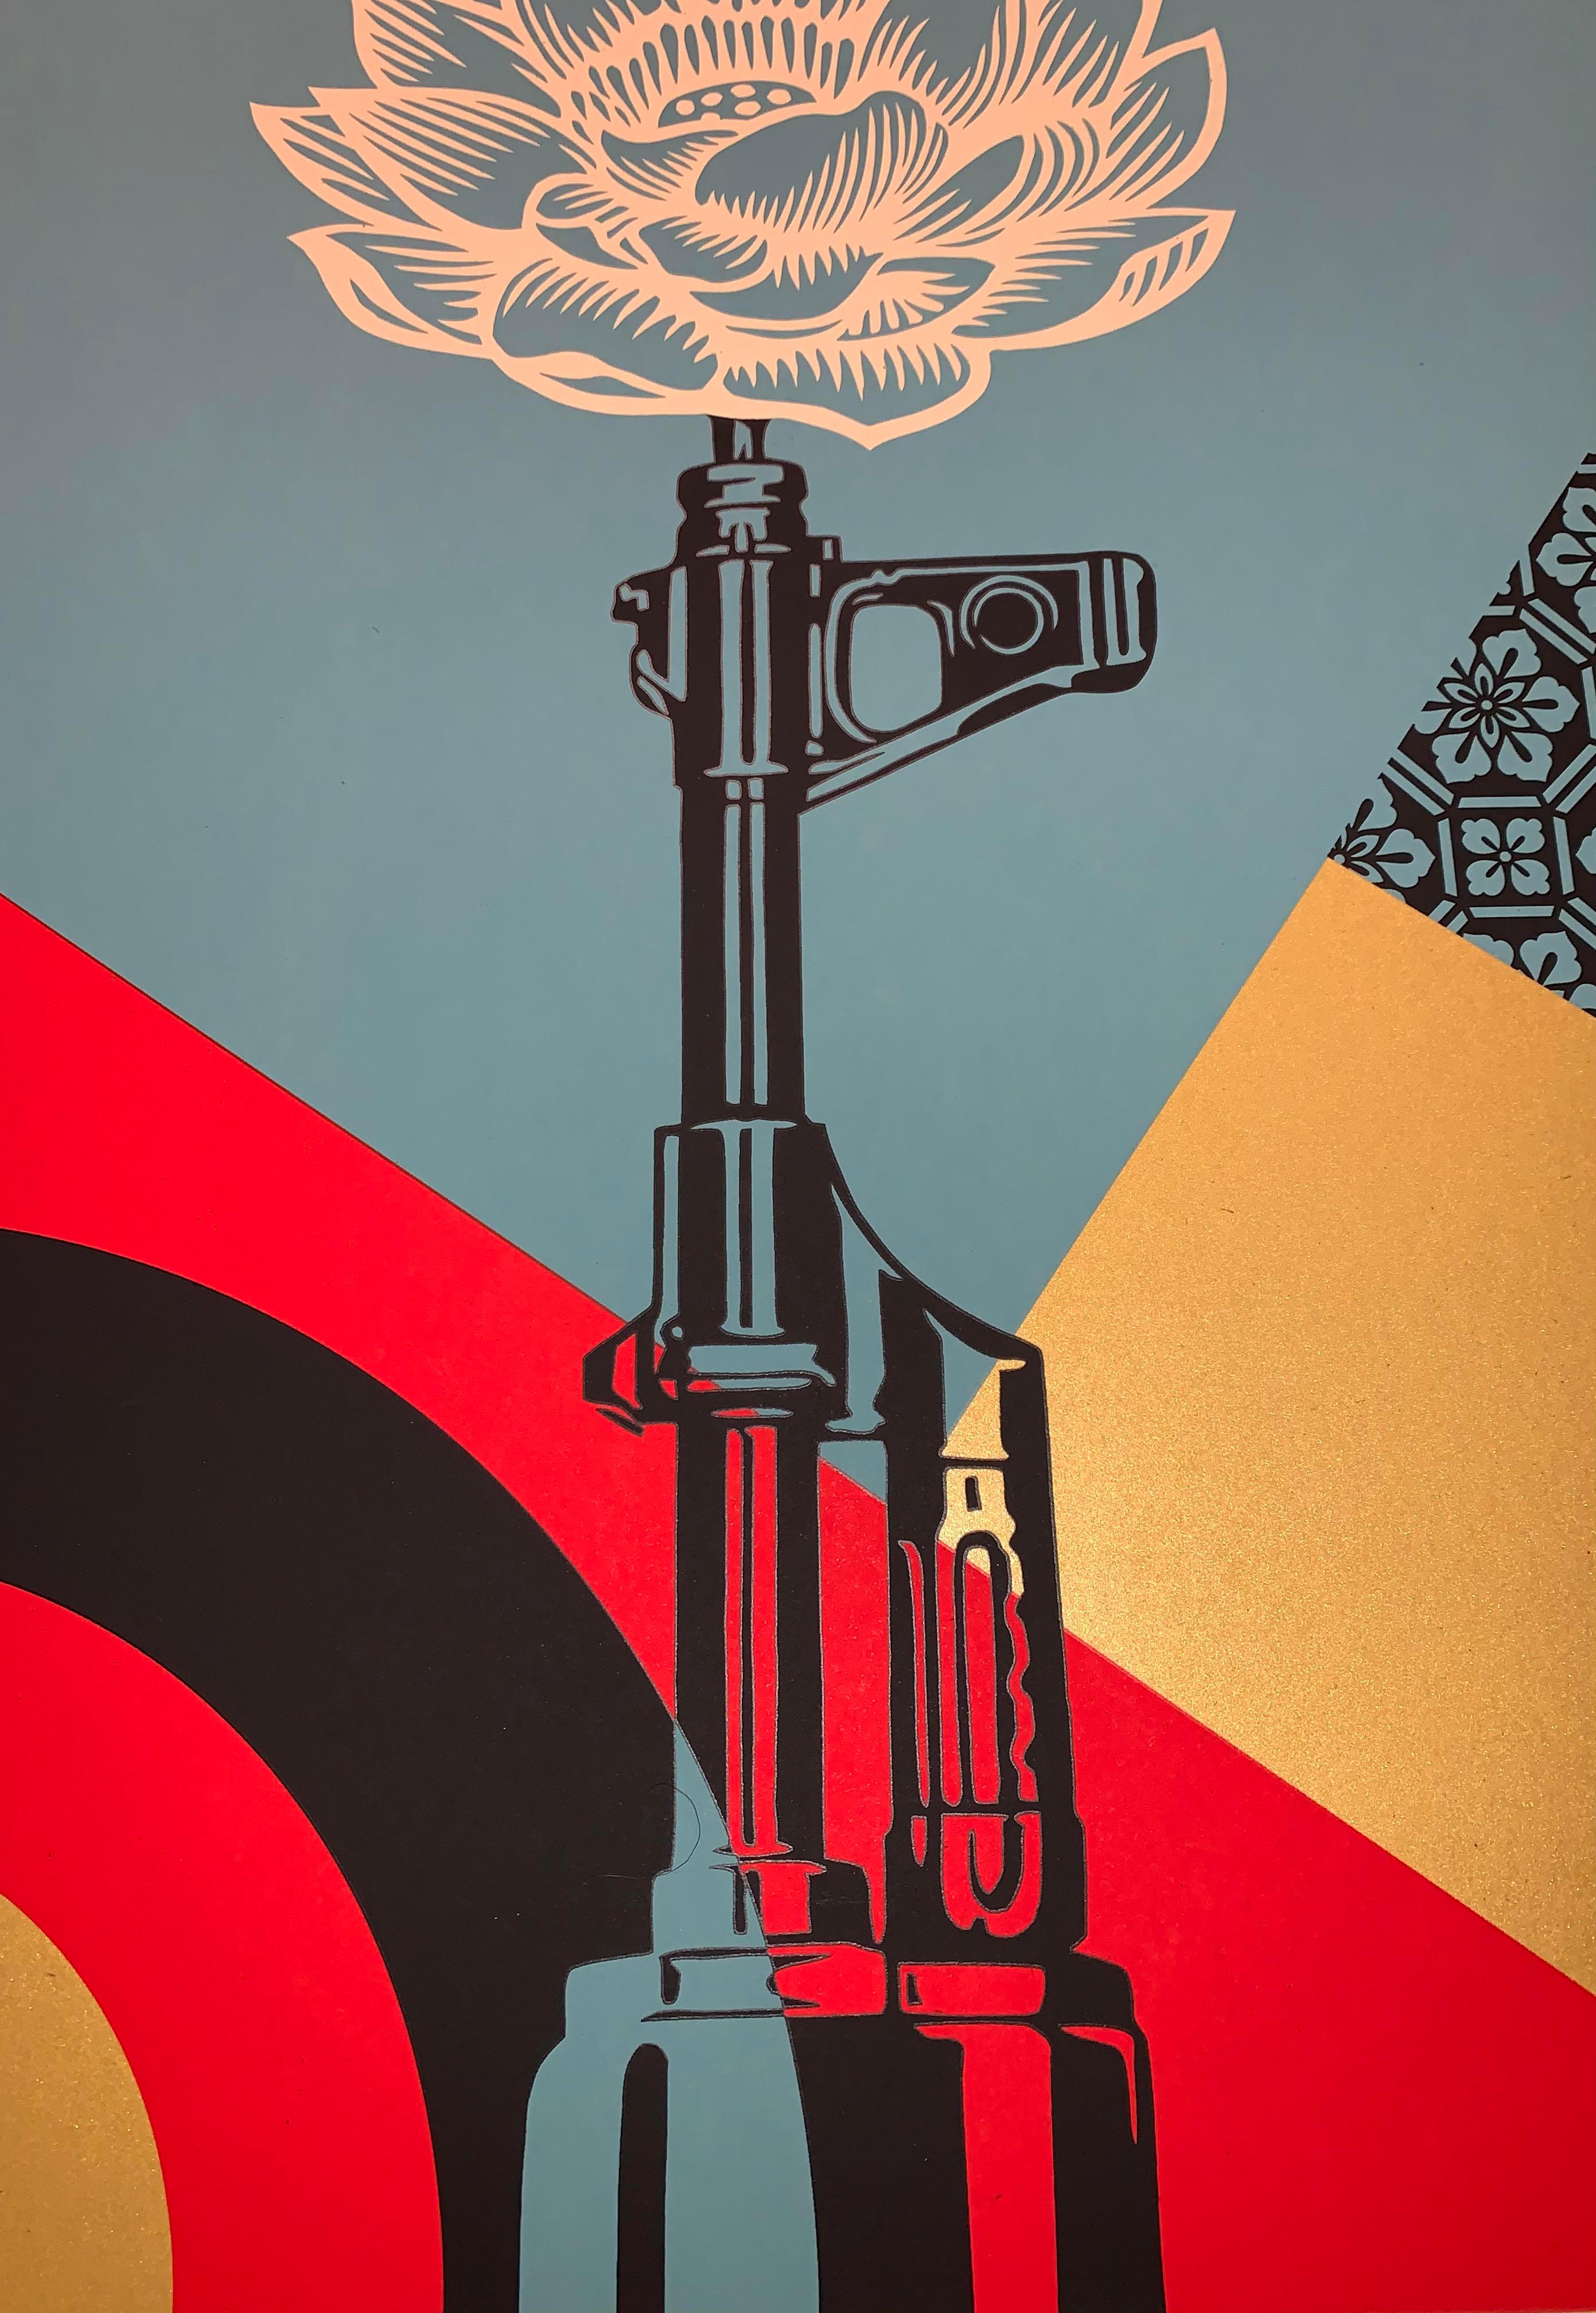 OBEY AK-47 LOTUS Shepard Fairey SIGNED & Numbered Obey Giant Vietnam War Peace 